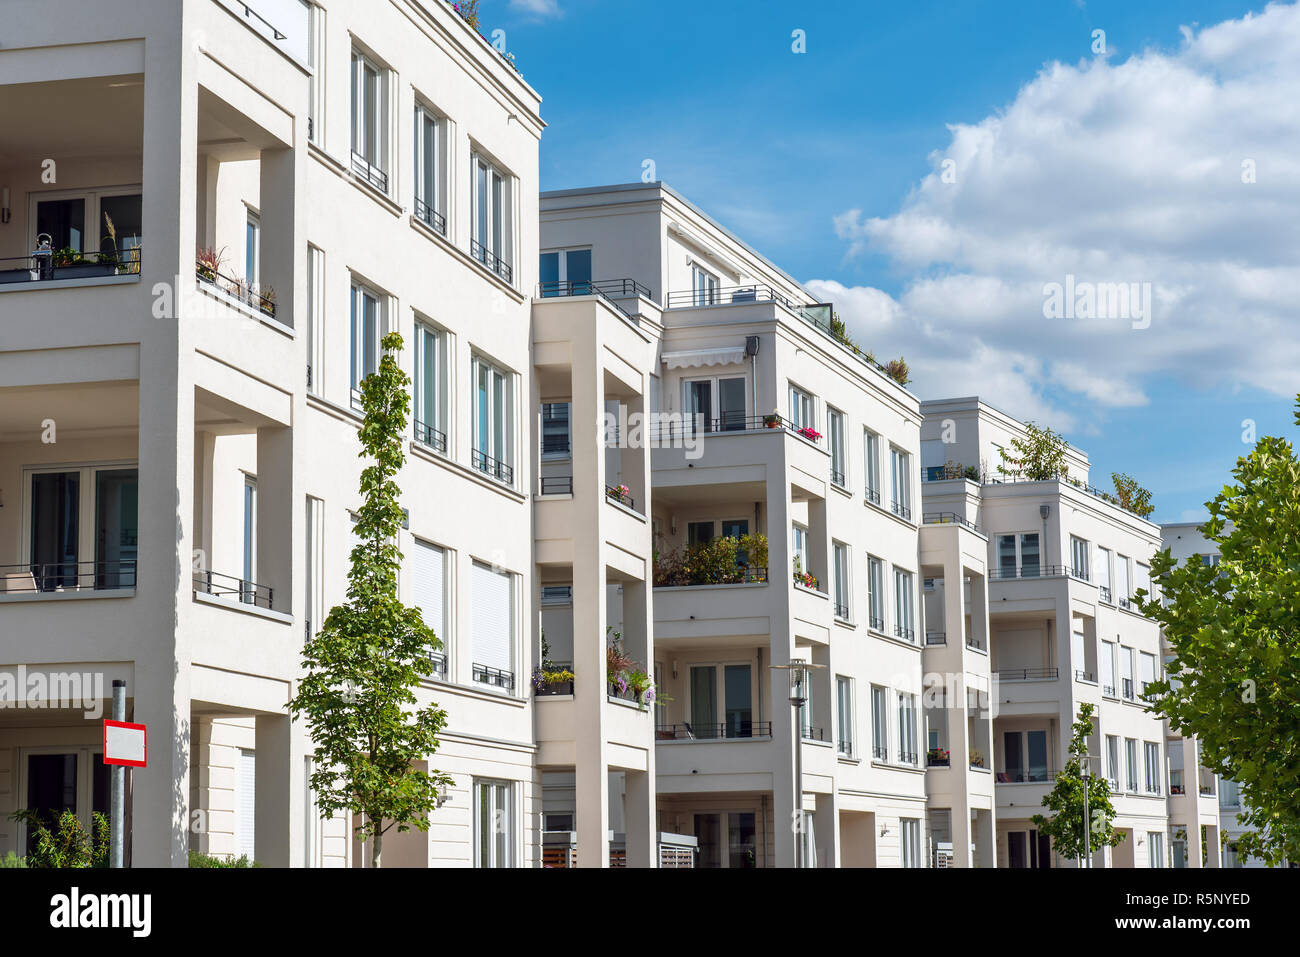 Row of white modern apartment houses seen in Berlin, Germany Stock Photo